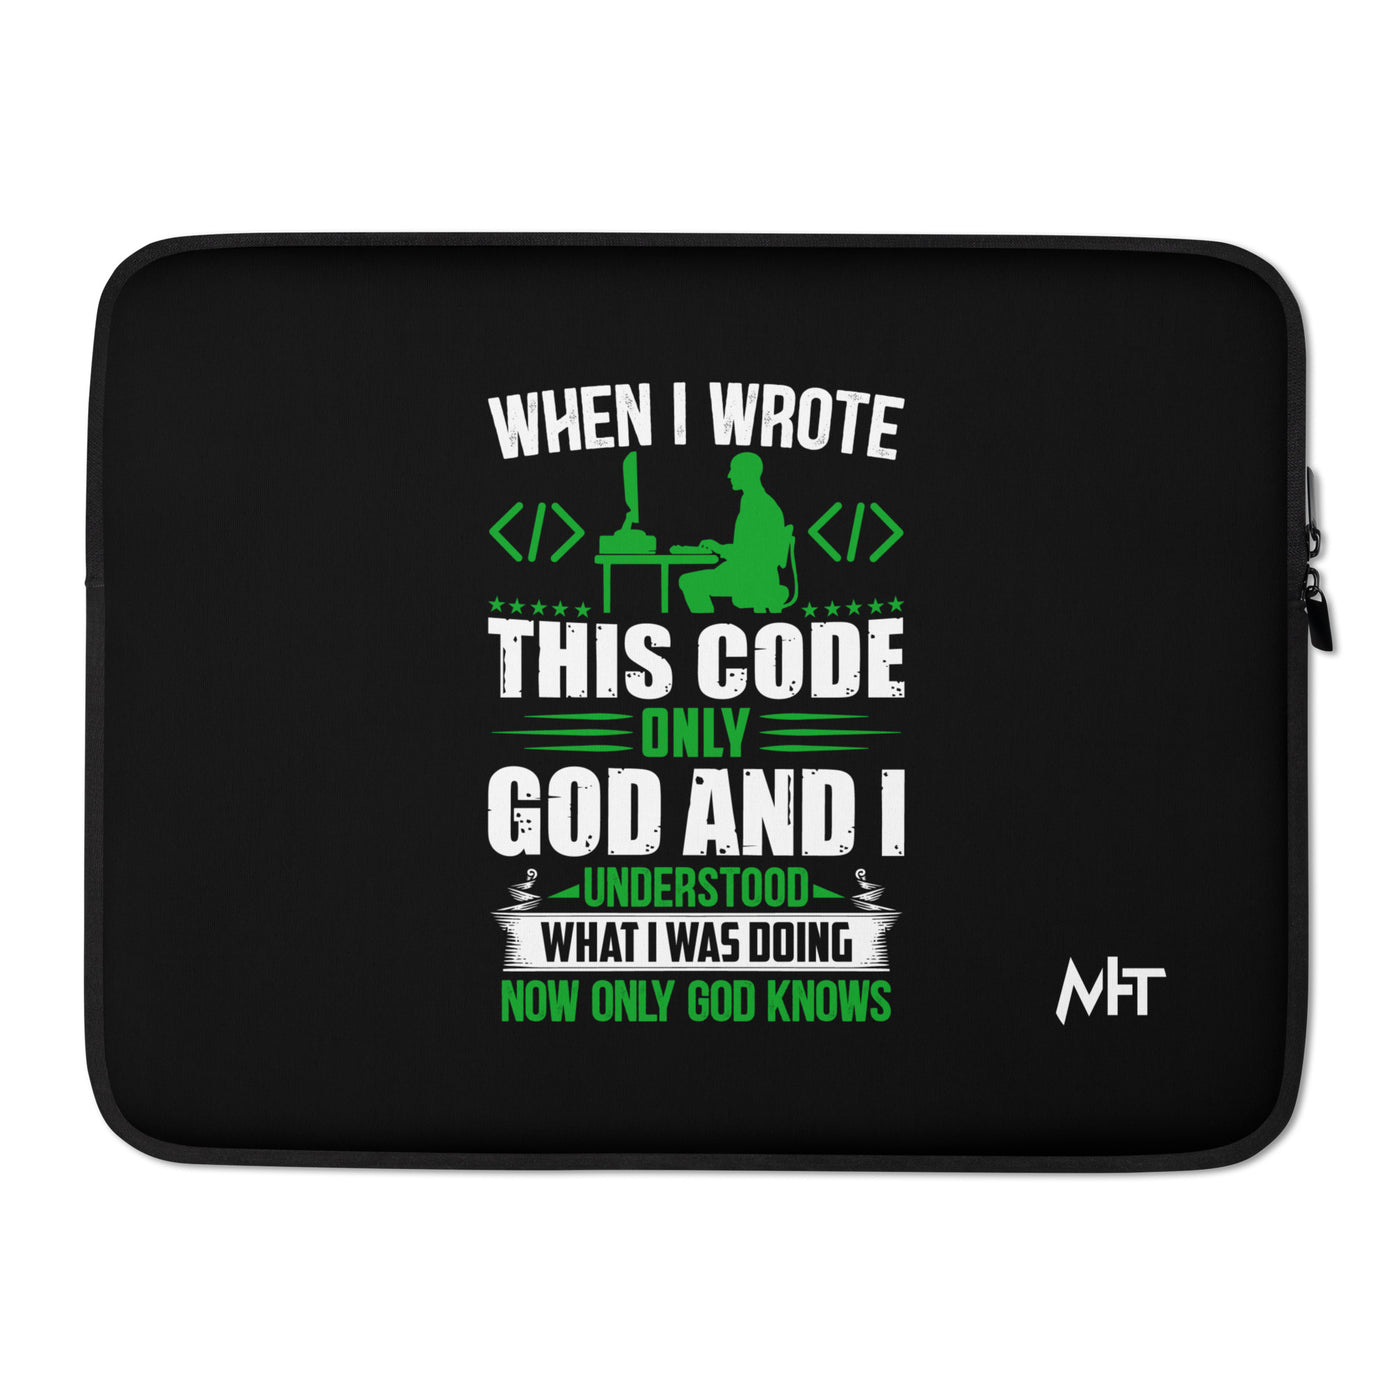 When I Wrote this code, only God and I Understood - Laptop Sleeve